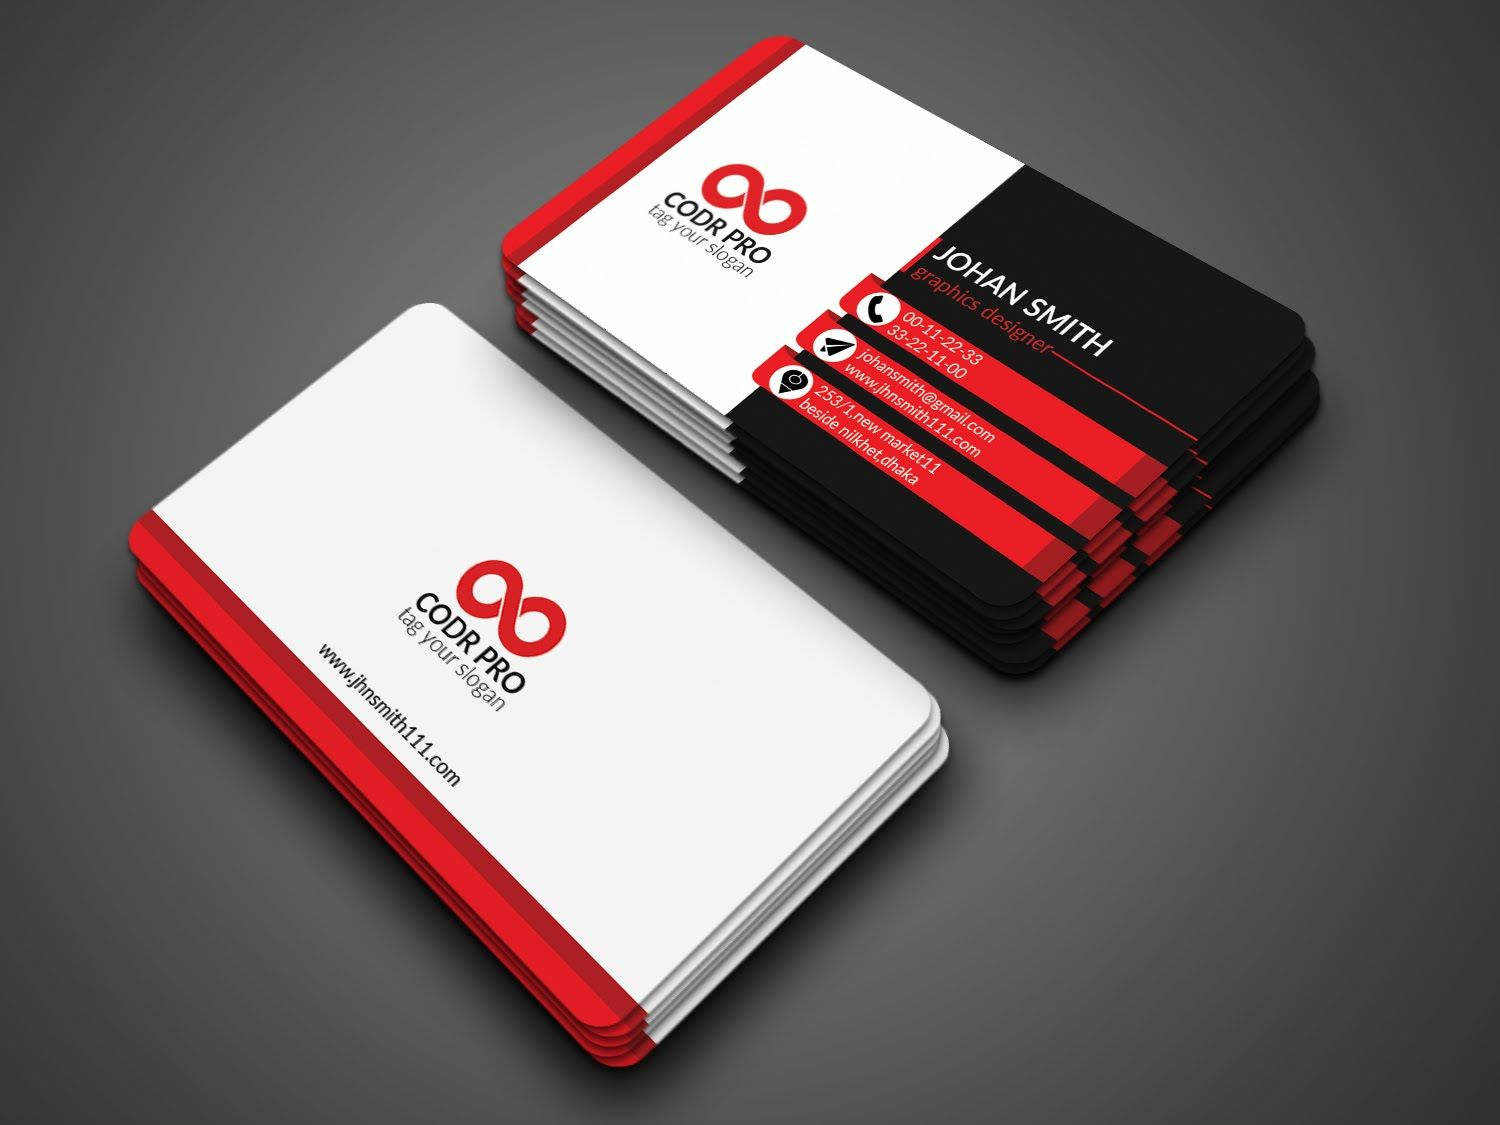 Professional Business Card Design In Photoshop Cs6 Tutorial For Business Card Template Photoshop Cs6